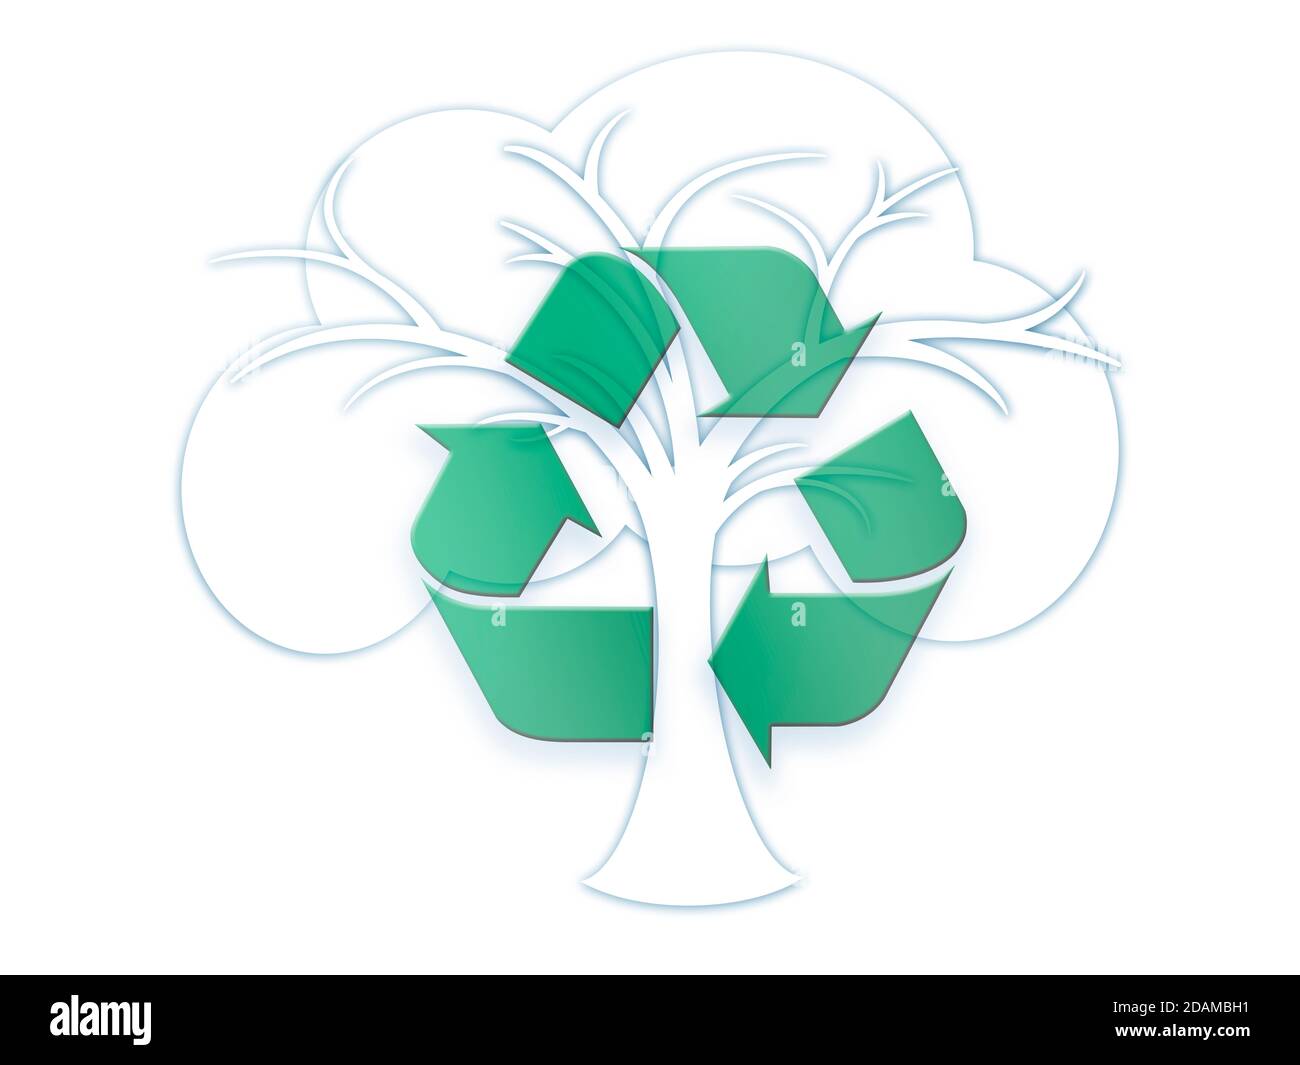 Tree with recycling symbol, illustration. Stock Photo